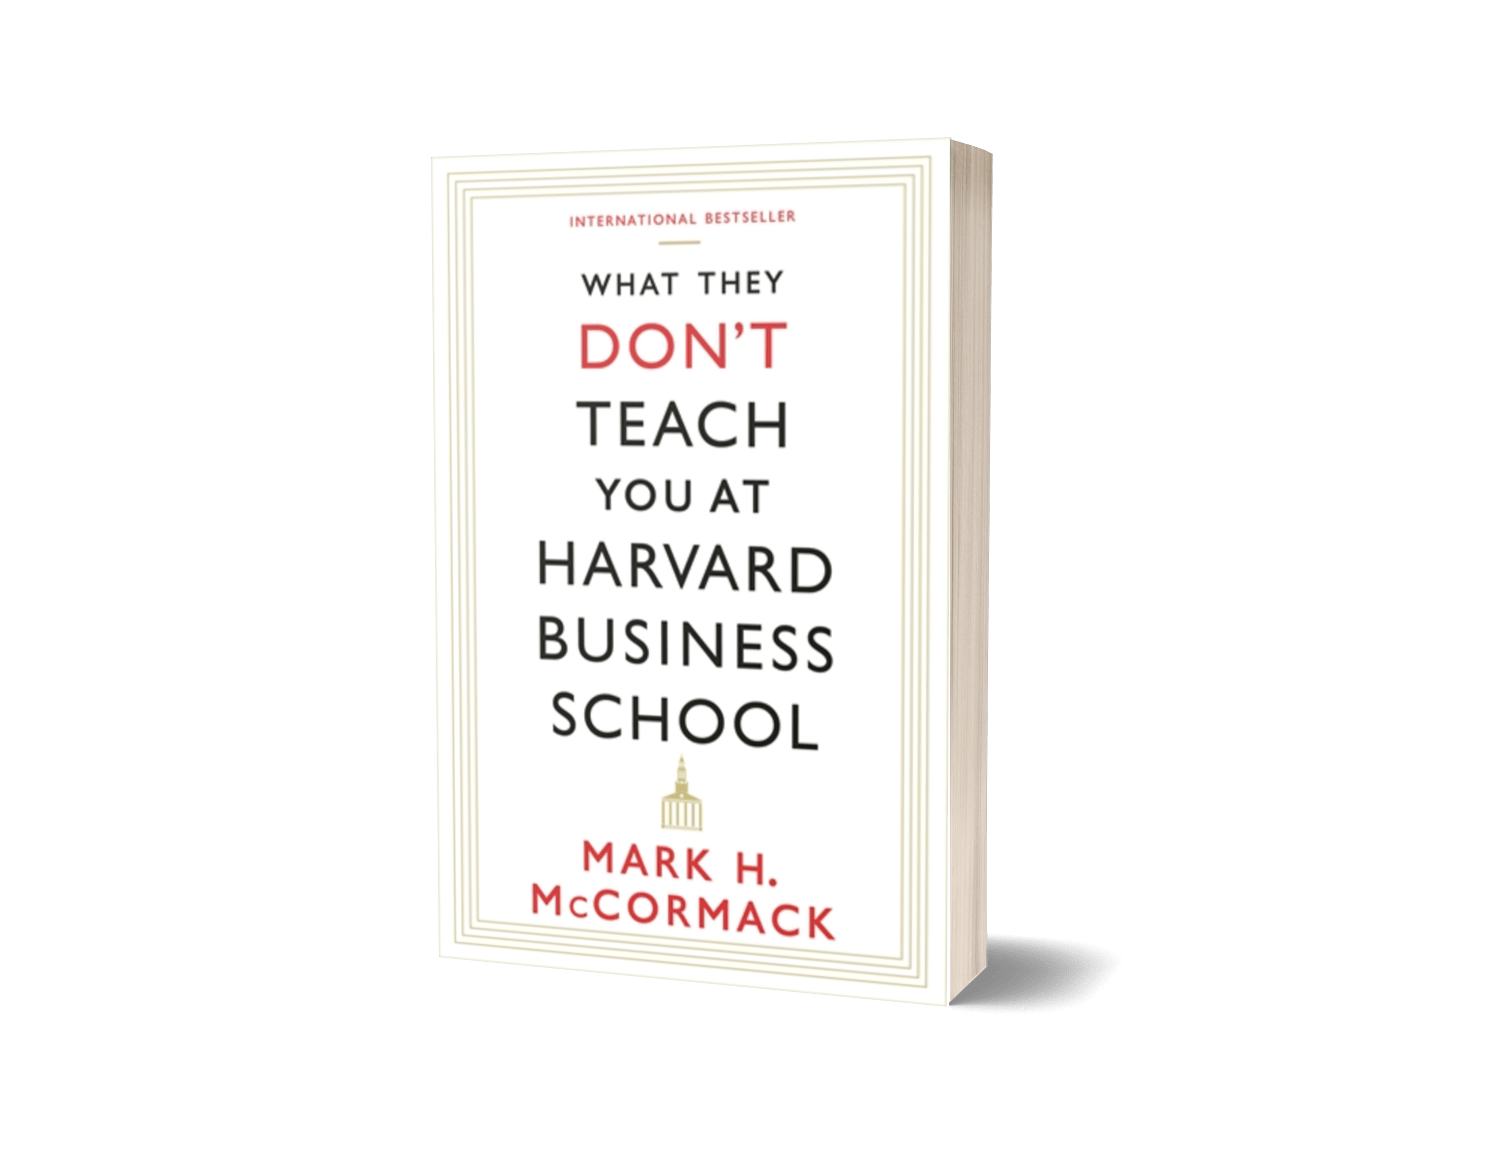 WHAT THEY DON’T TEACH YOU AT HARVARD BUSINESS SCHOOL